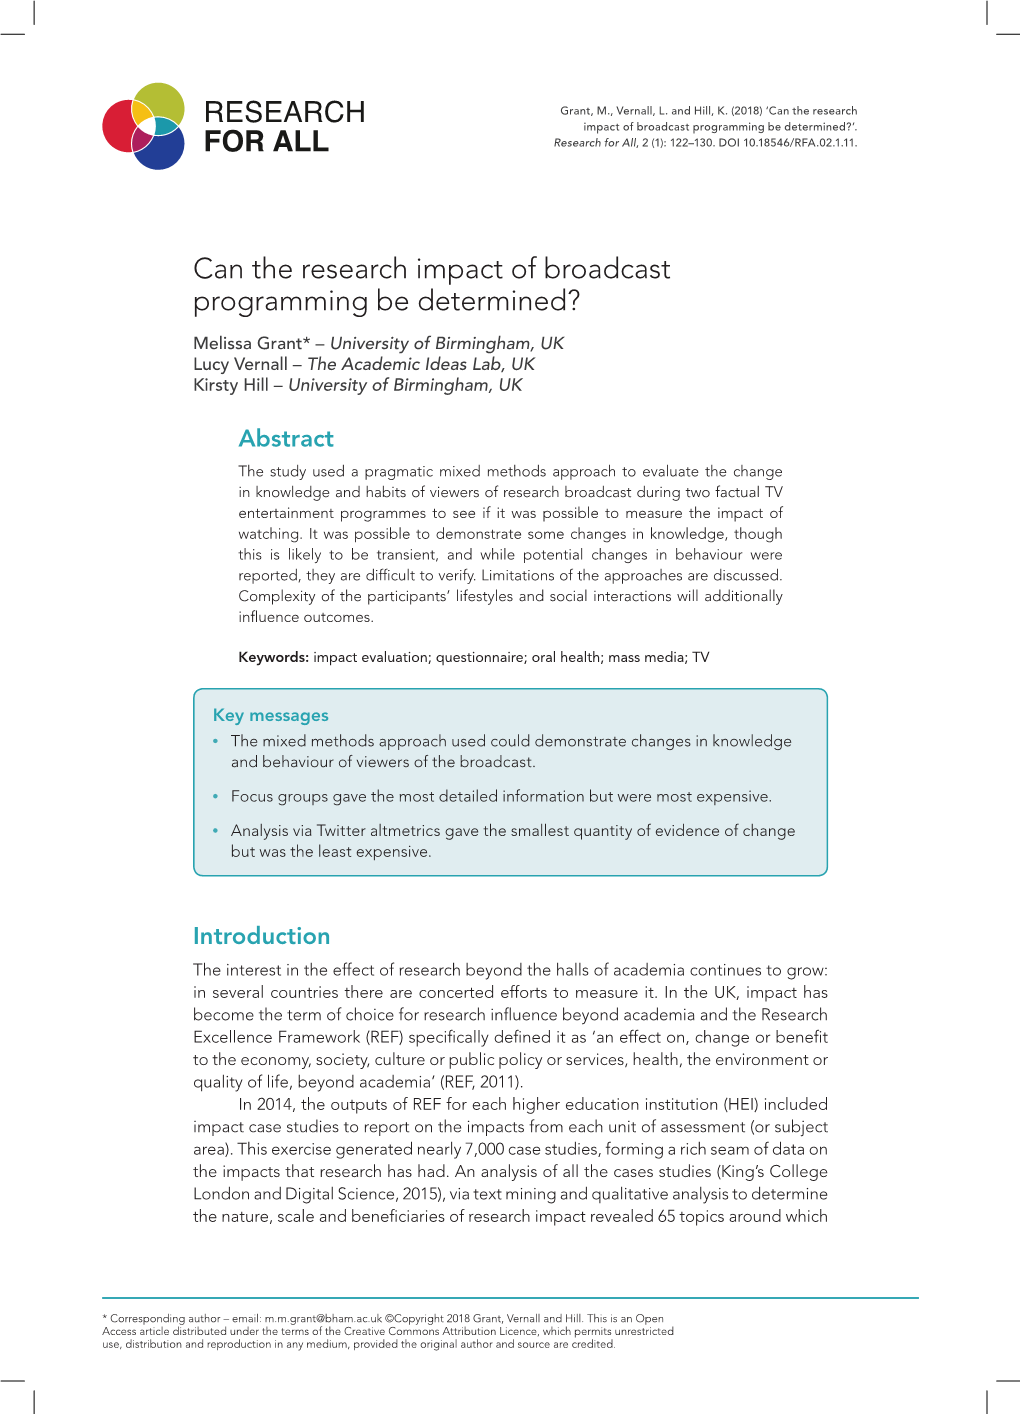 Can the Research Impact of Broadcast Programming Be Determined?’